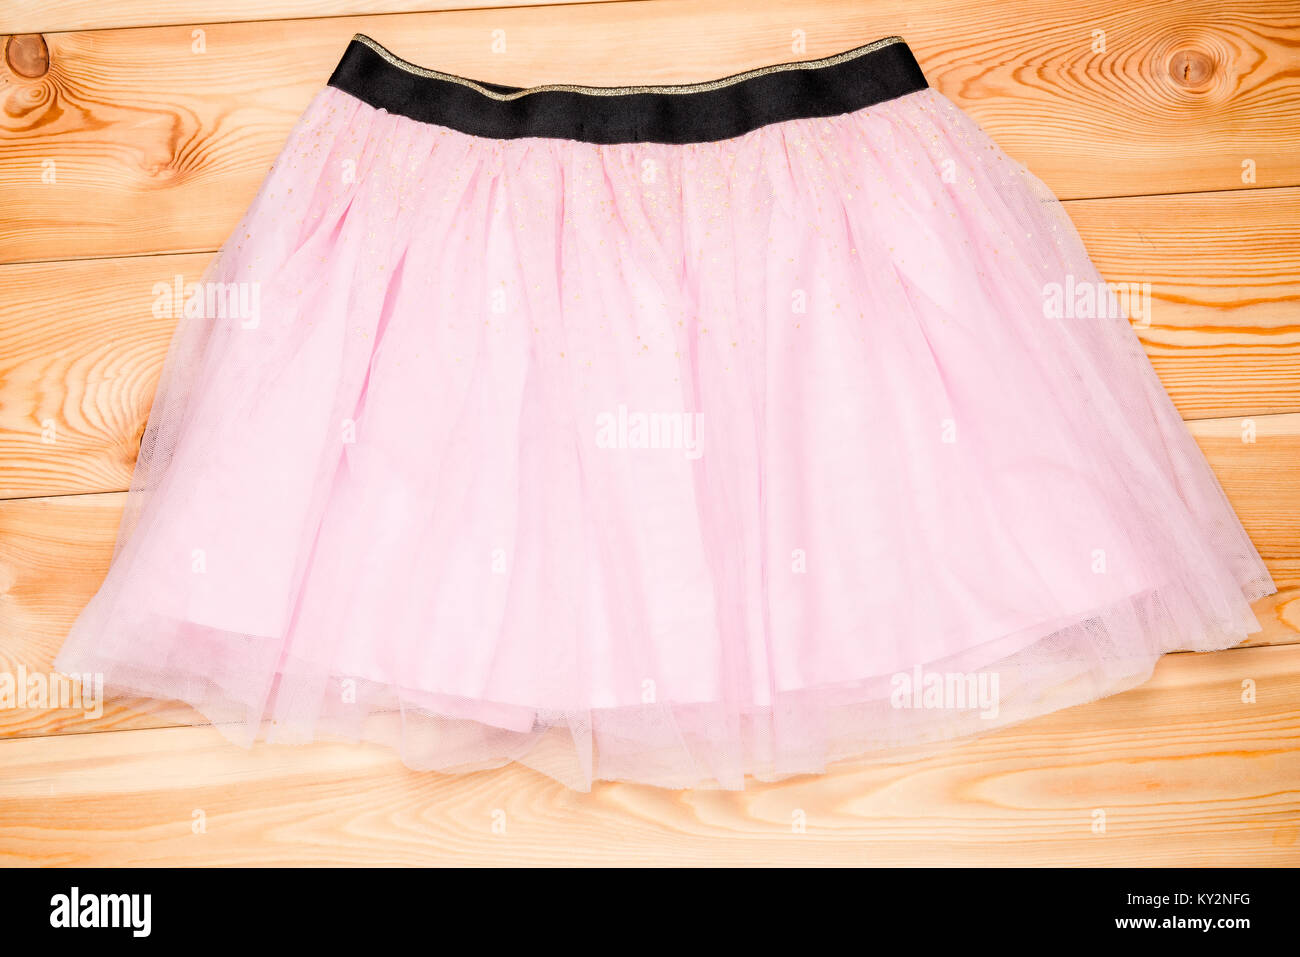 pink tulle skirt on wooden boards for girls Stock Photo